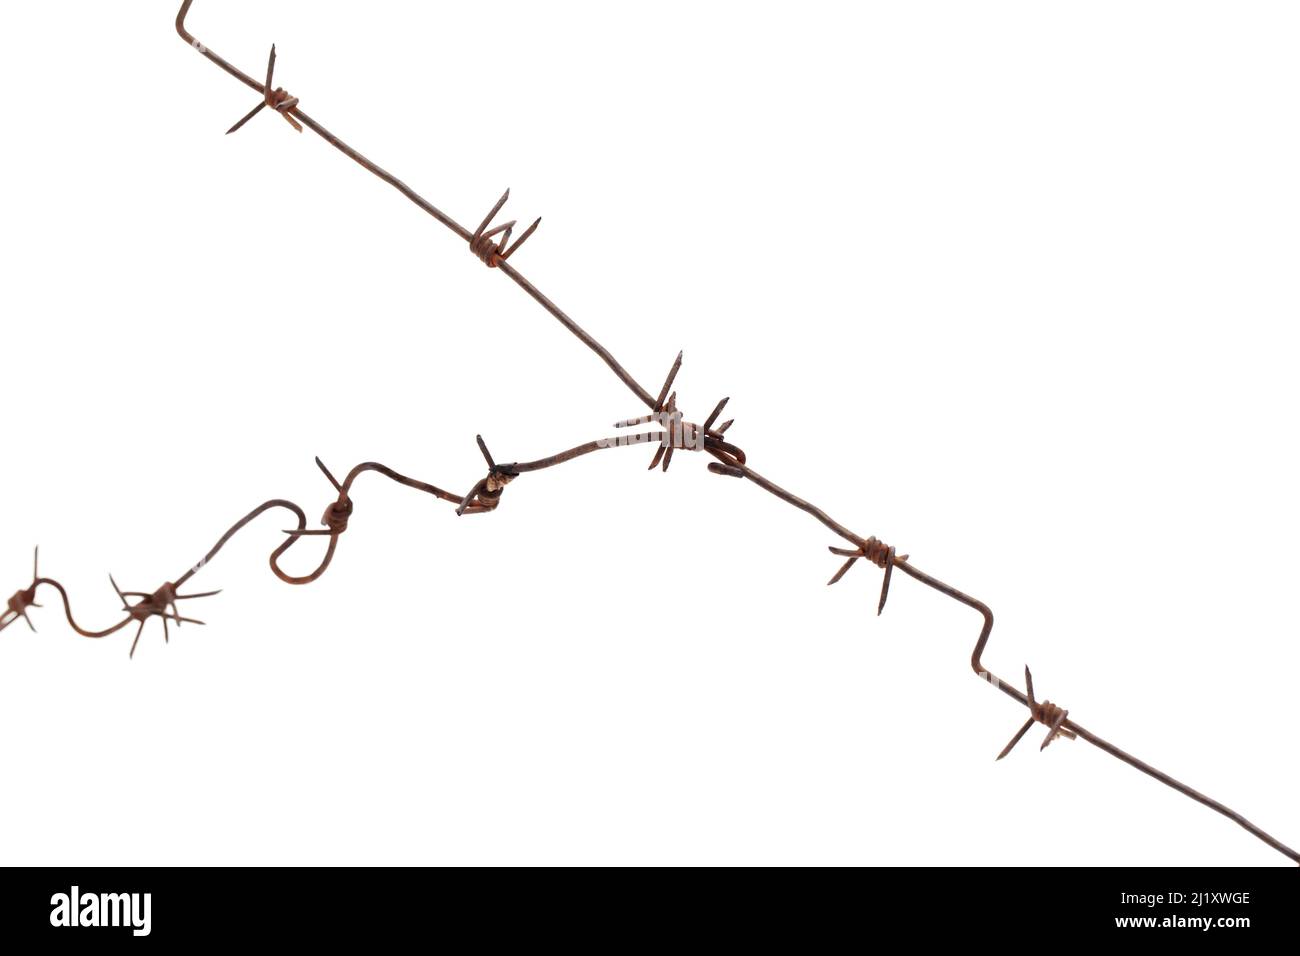 Rusty old barbed wire isolated on white background, abstract photo Stock Photo